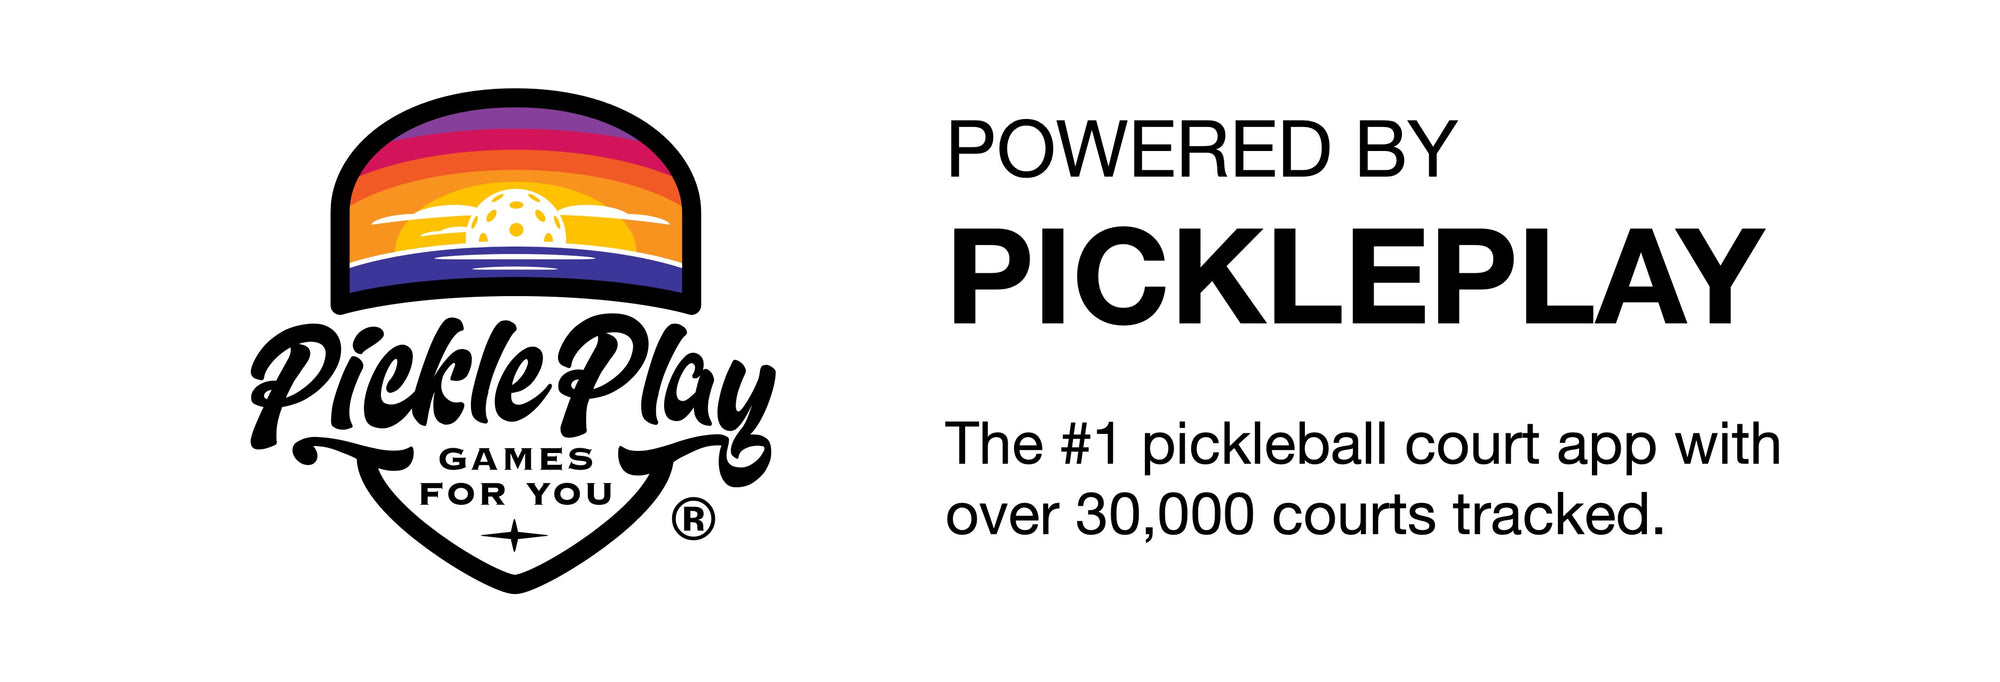 Graphic of "Pickleball Play Games For You" Logo and wording. | Pickleball Superstore